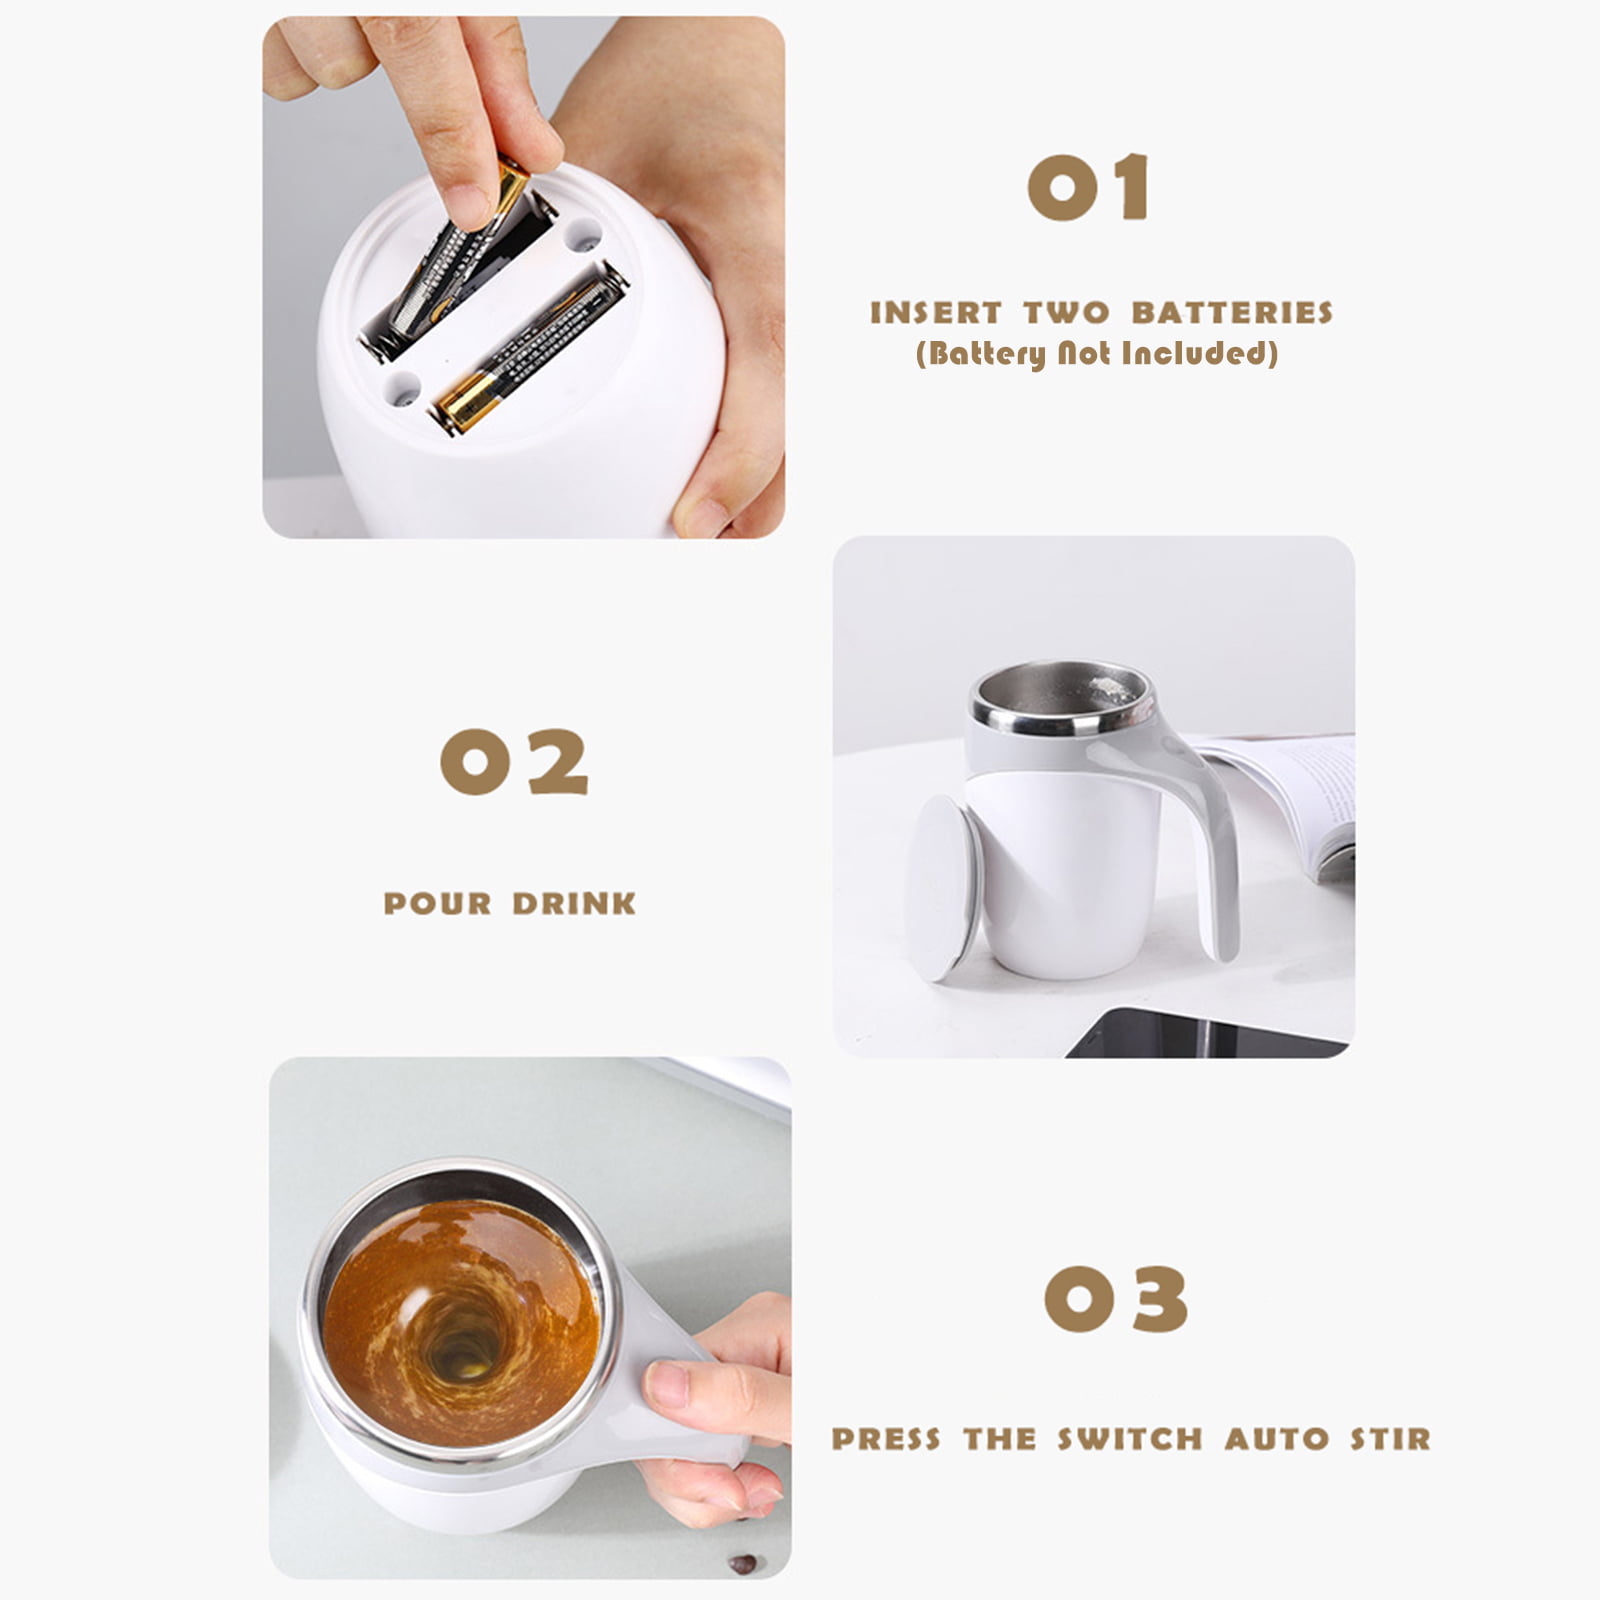 Austok Self Stirring Coffee Mug,Electric Stainless Steel Automatic Mixing  Cup,USB Rechargeable Self Stirring Coffee Mug,Portable Self Mixing Coffee  Cup for Home Office Coffee Milk 